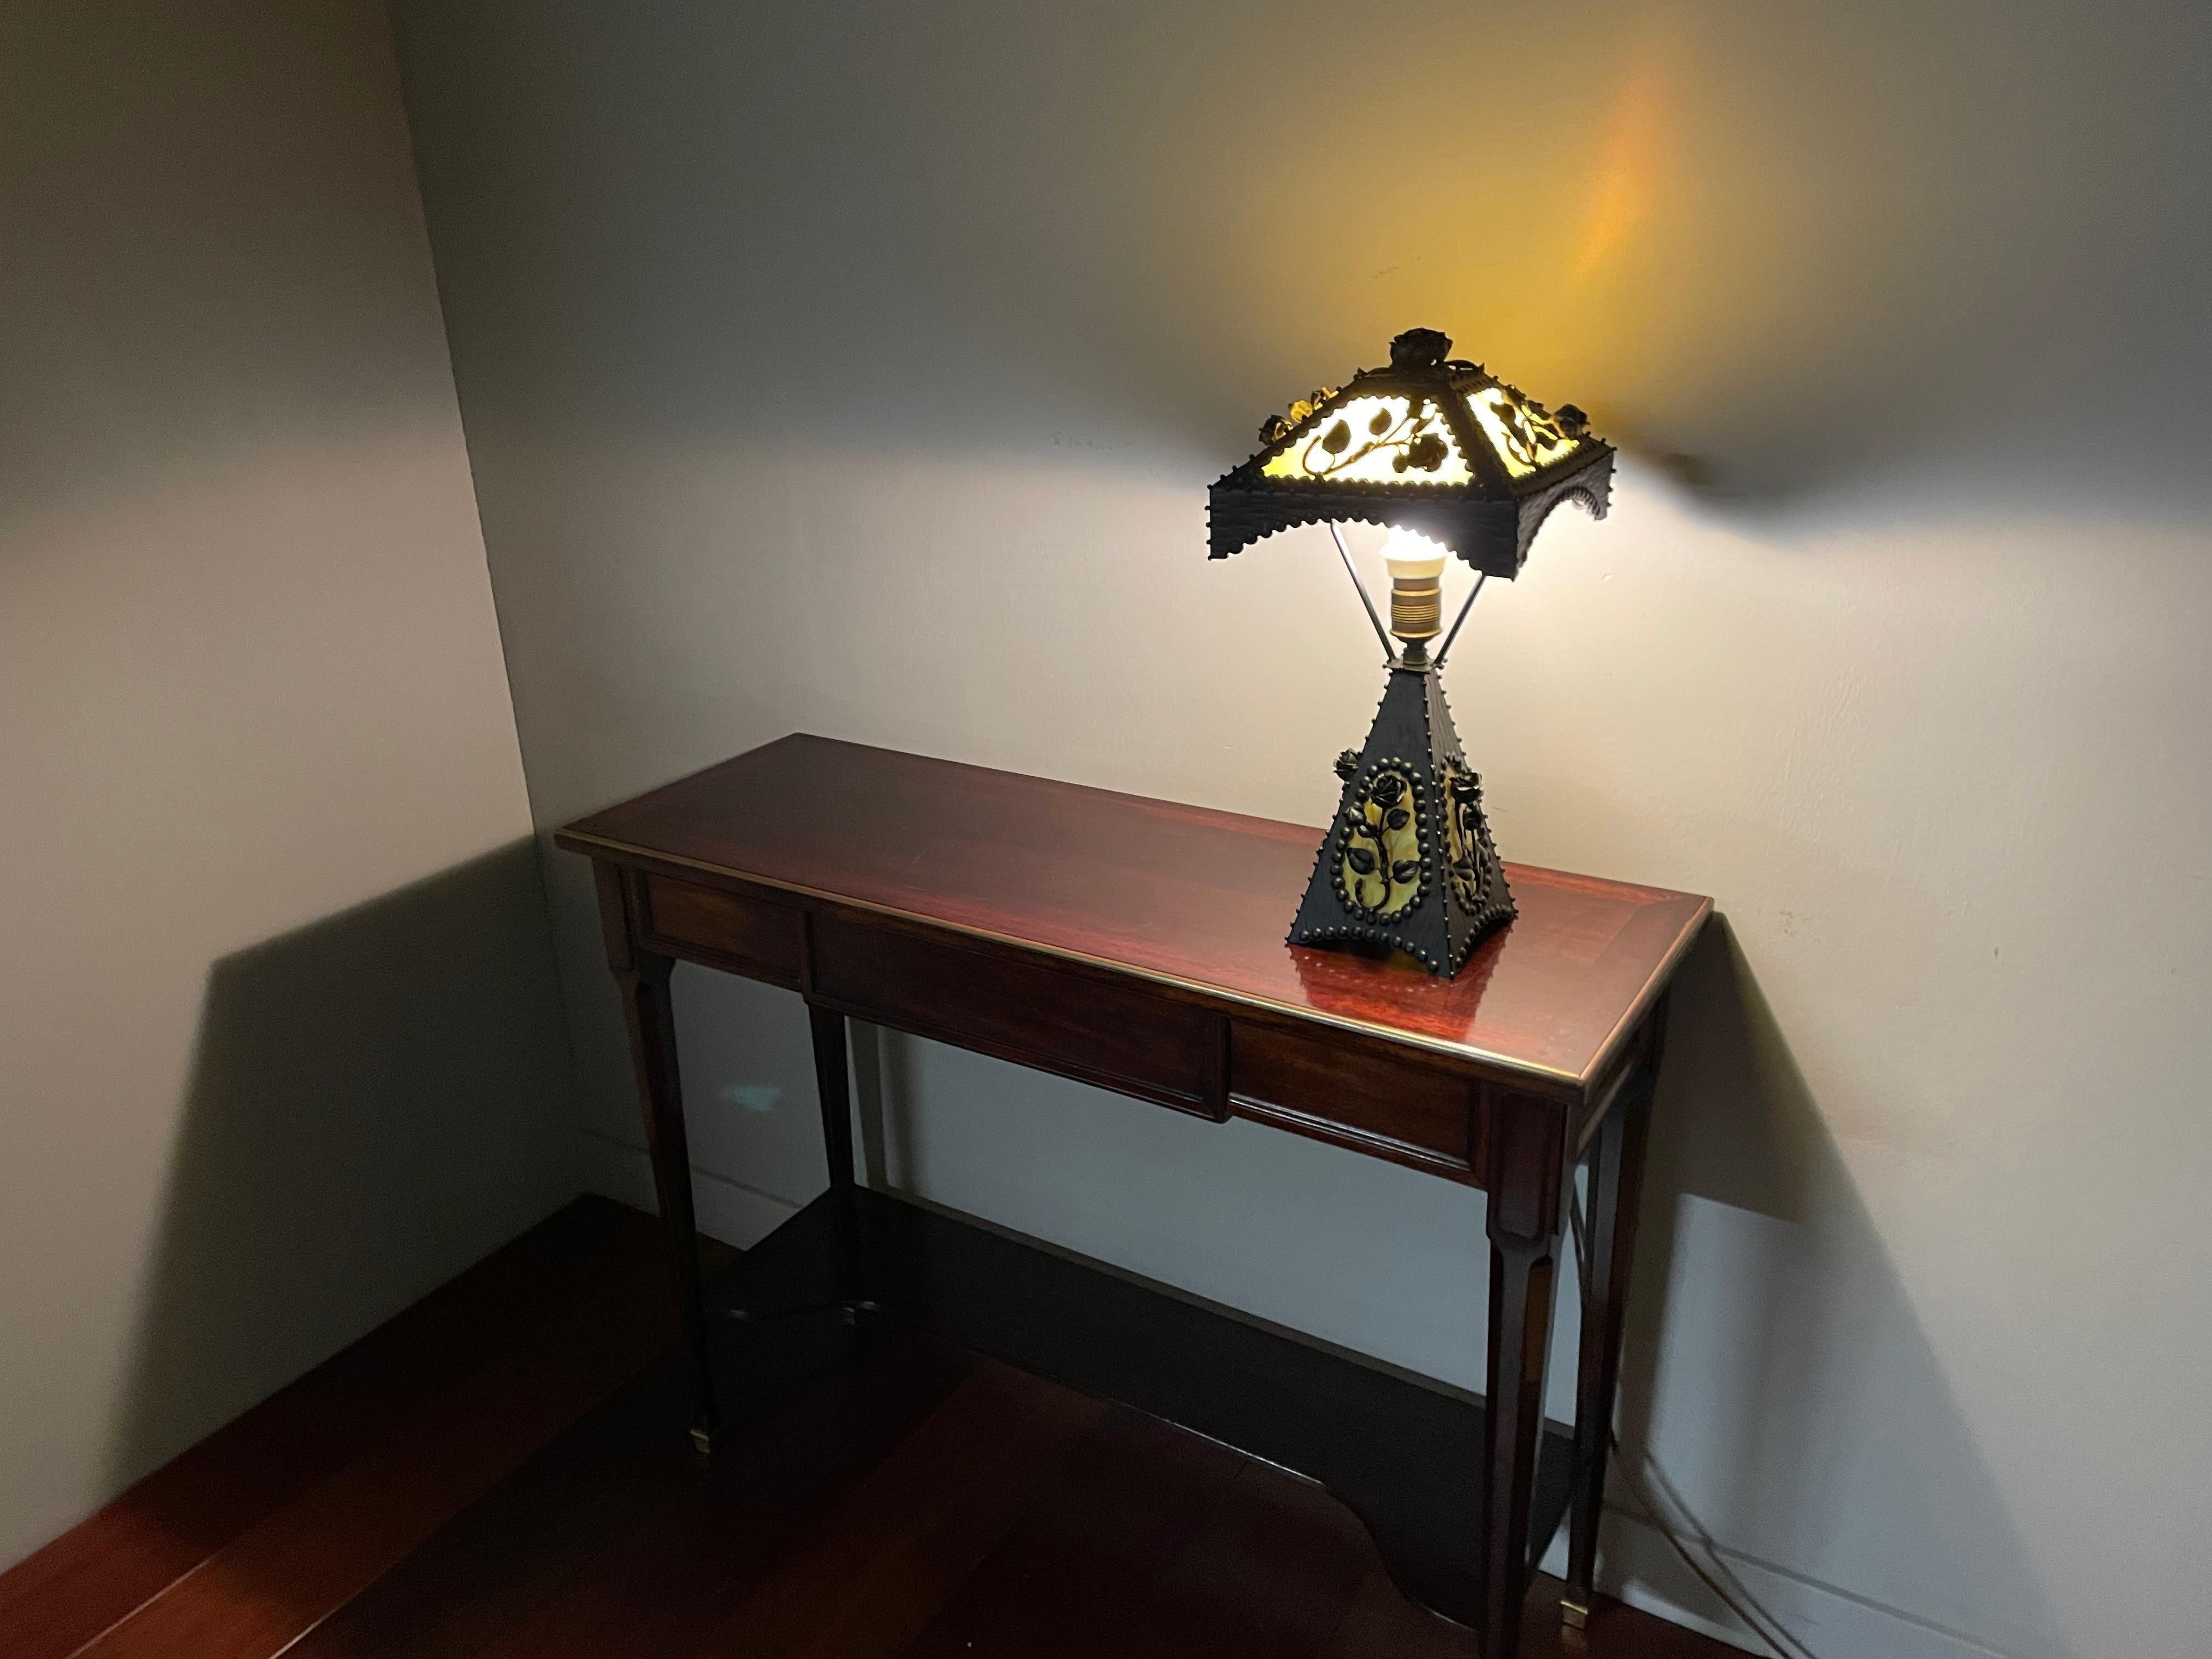 Amazing quality and beautifully stylish Arts & Crafts style table or desk lamp.

If you love the Arts and Crafts style in general and roses in particular then this could be the perfect table lamp for your home or (home) office. Because of the